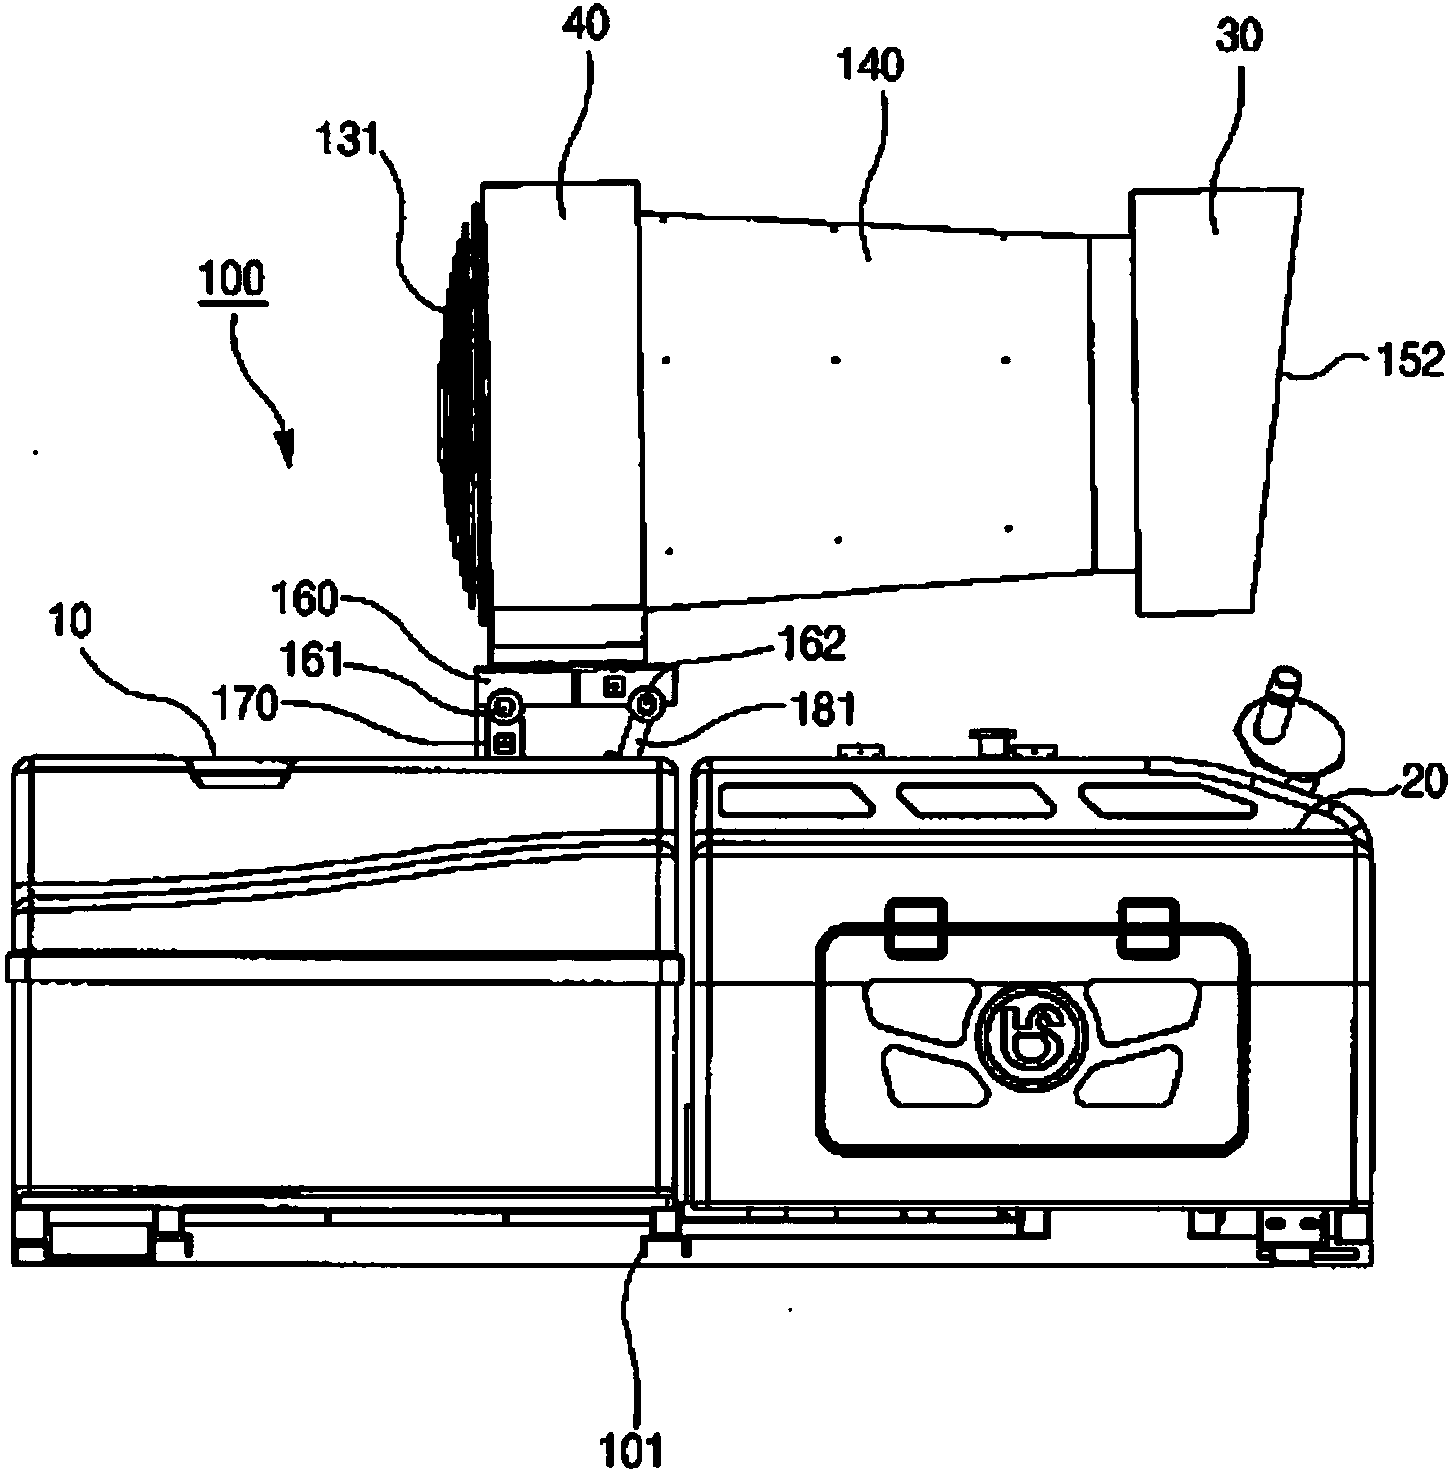 Smart pest control apparatus allowing wireless control and variable adjustment of dispersion amount